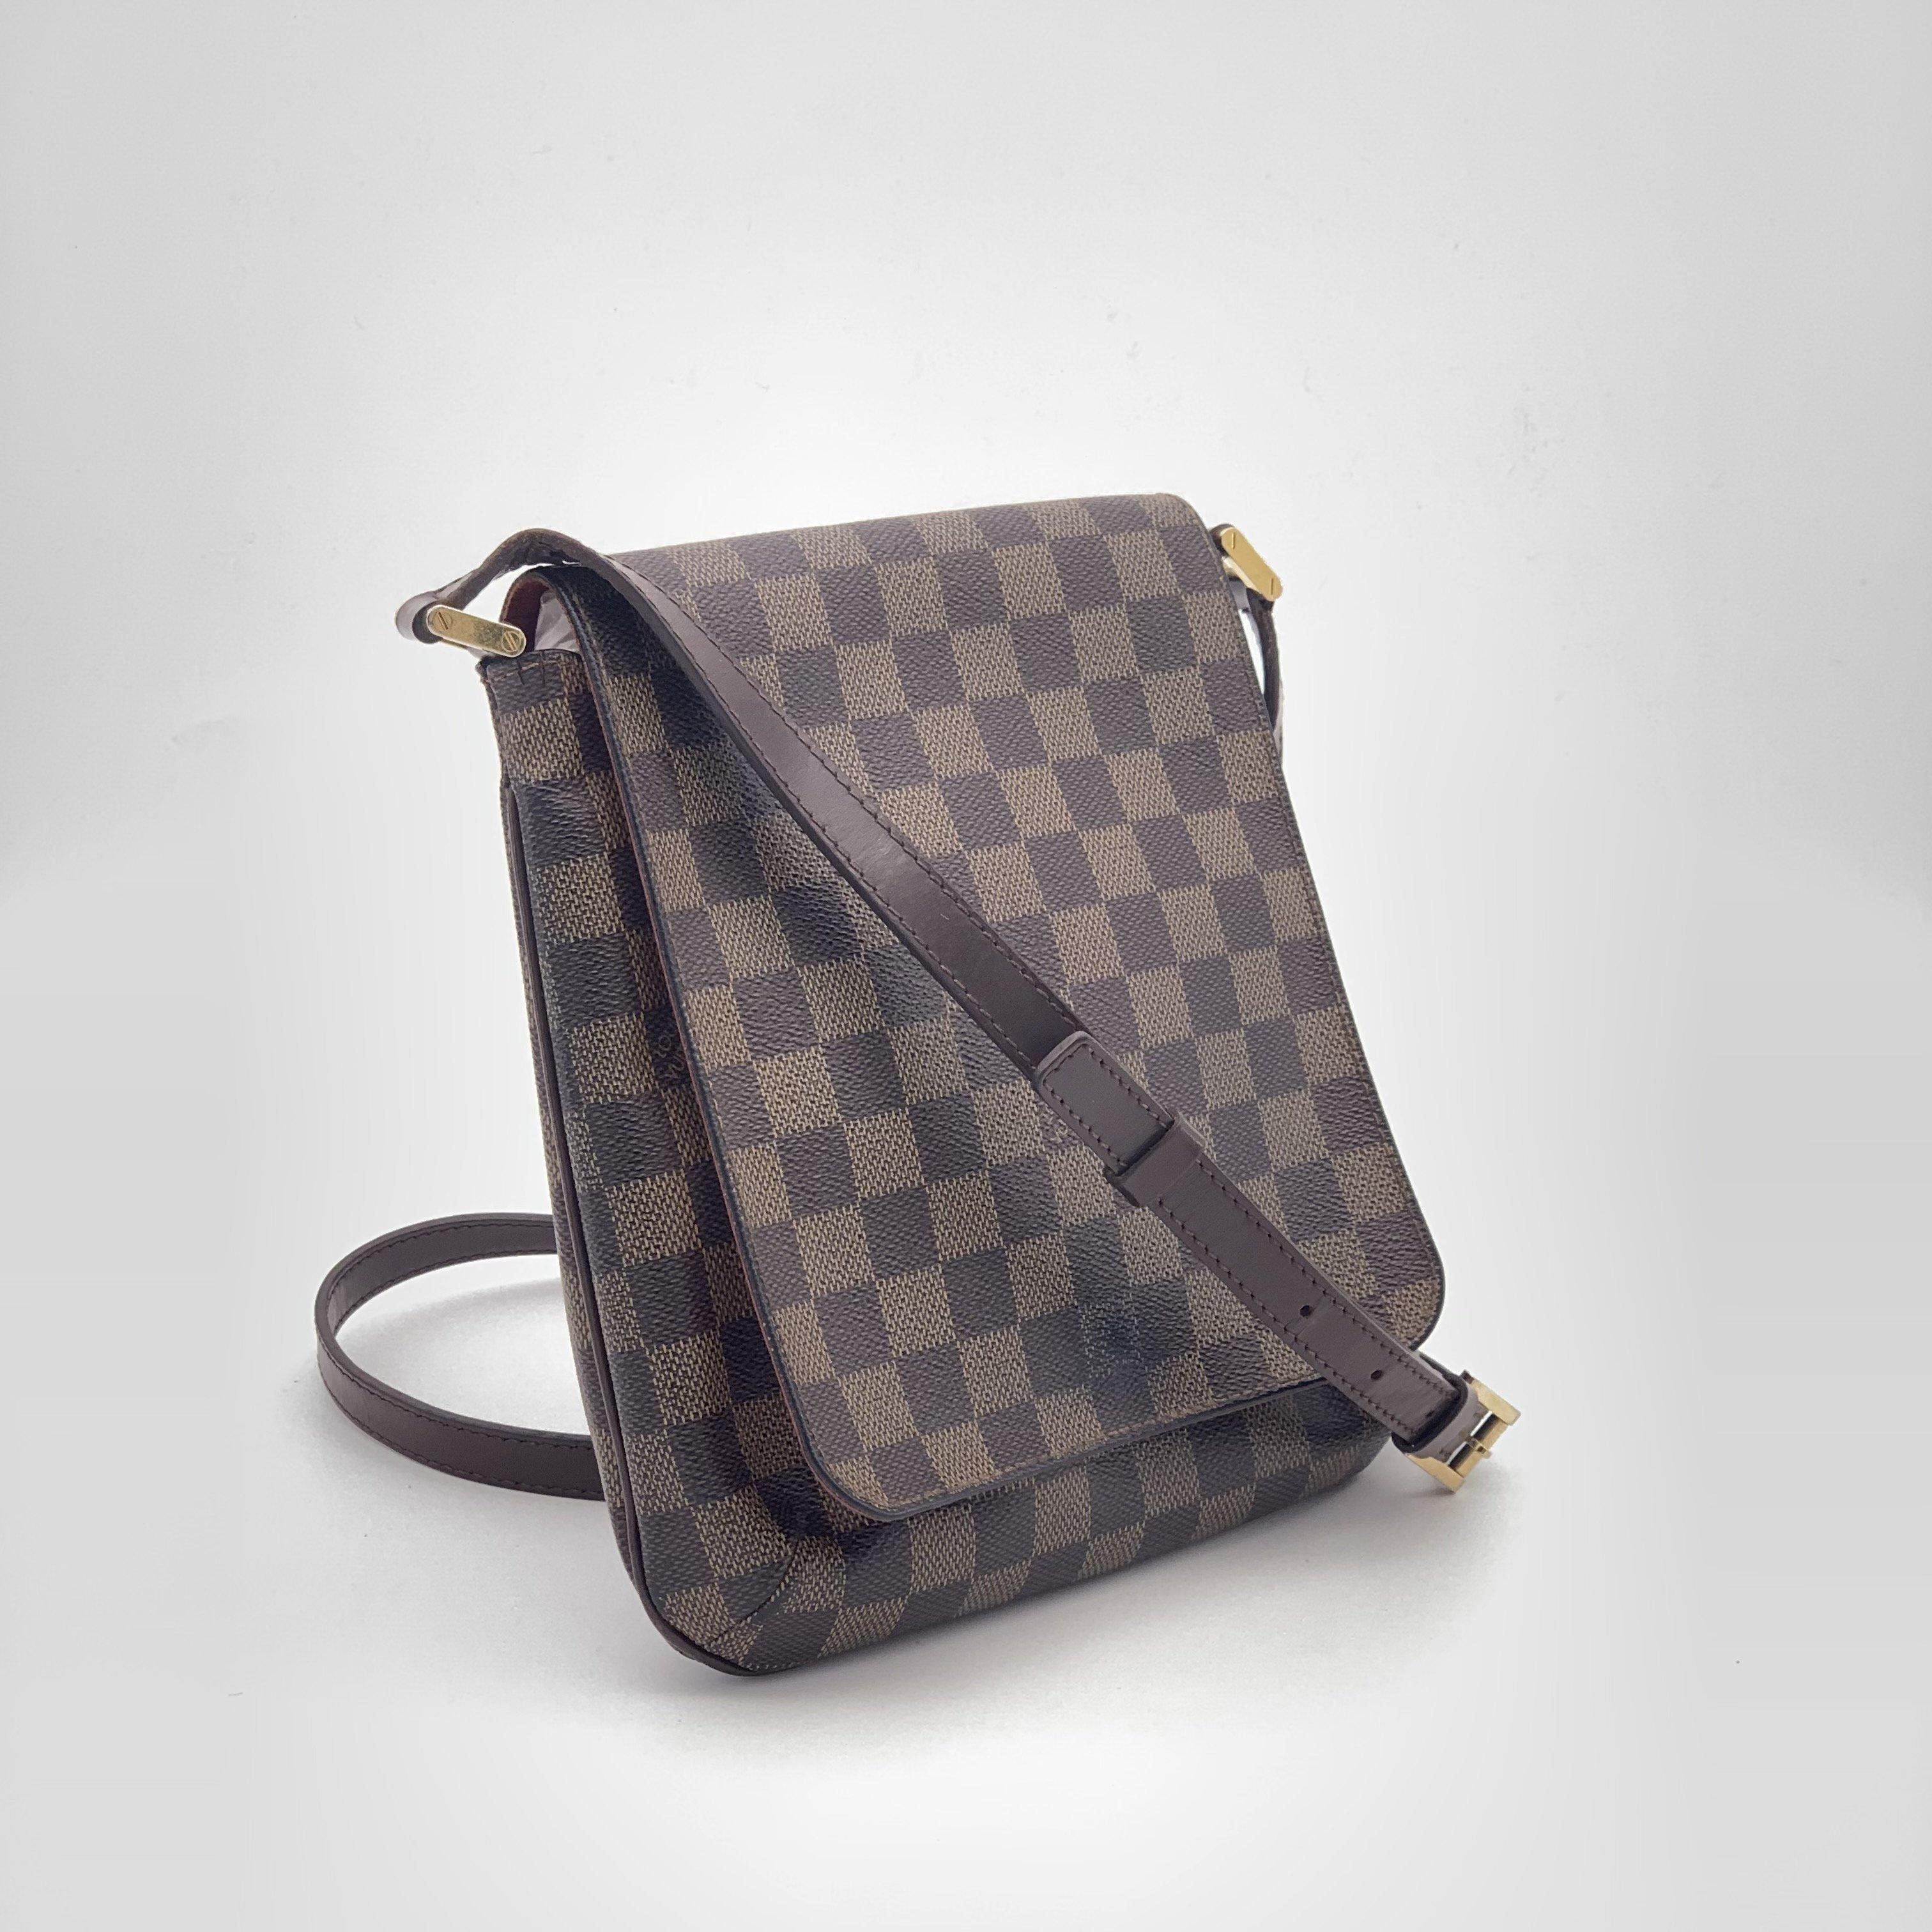 - Designer: LOUIS VUITTON
- Model: Musette
- Condition: Very good condition. Stain on the front of the bag, Sign of wear on Leather
- Accessories: None
- Measurements: Width: 21cm, Height: 24cm, Depth: 2cm, Strap: 120cm
- Exterior Material: